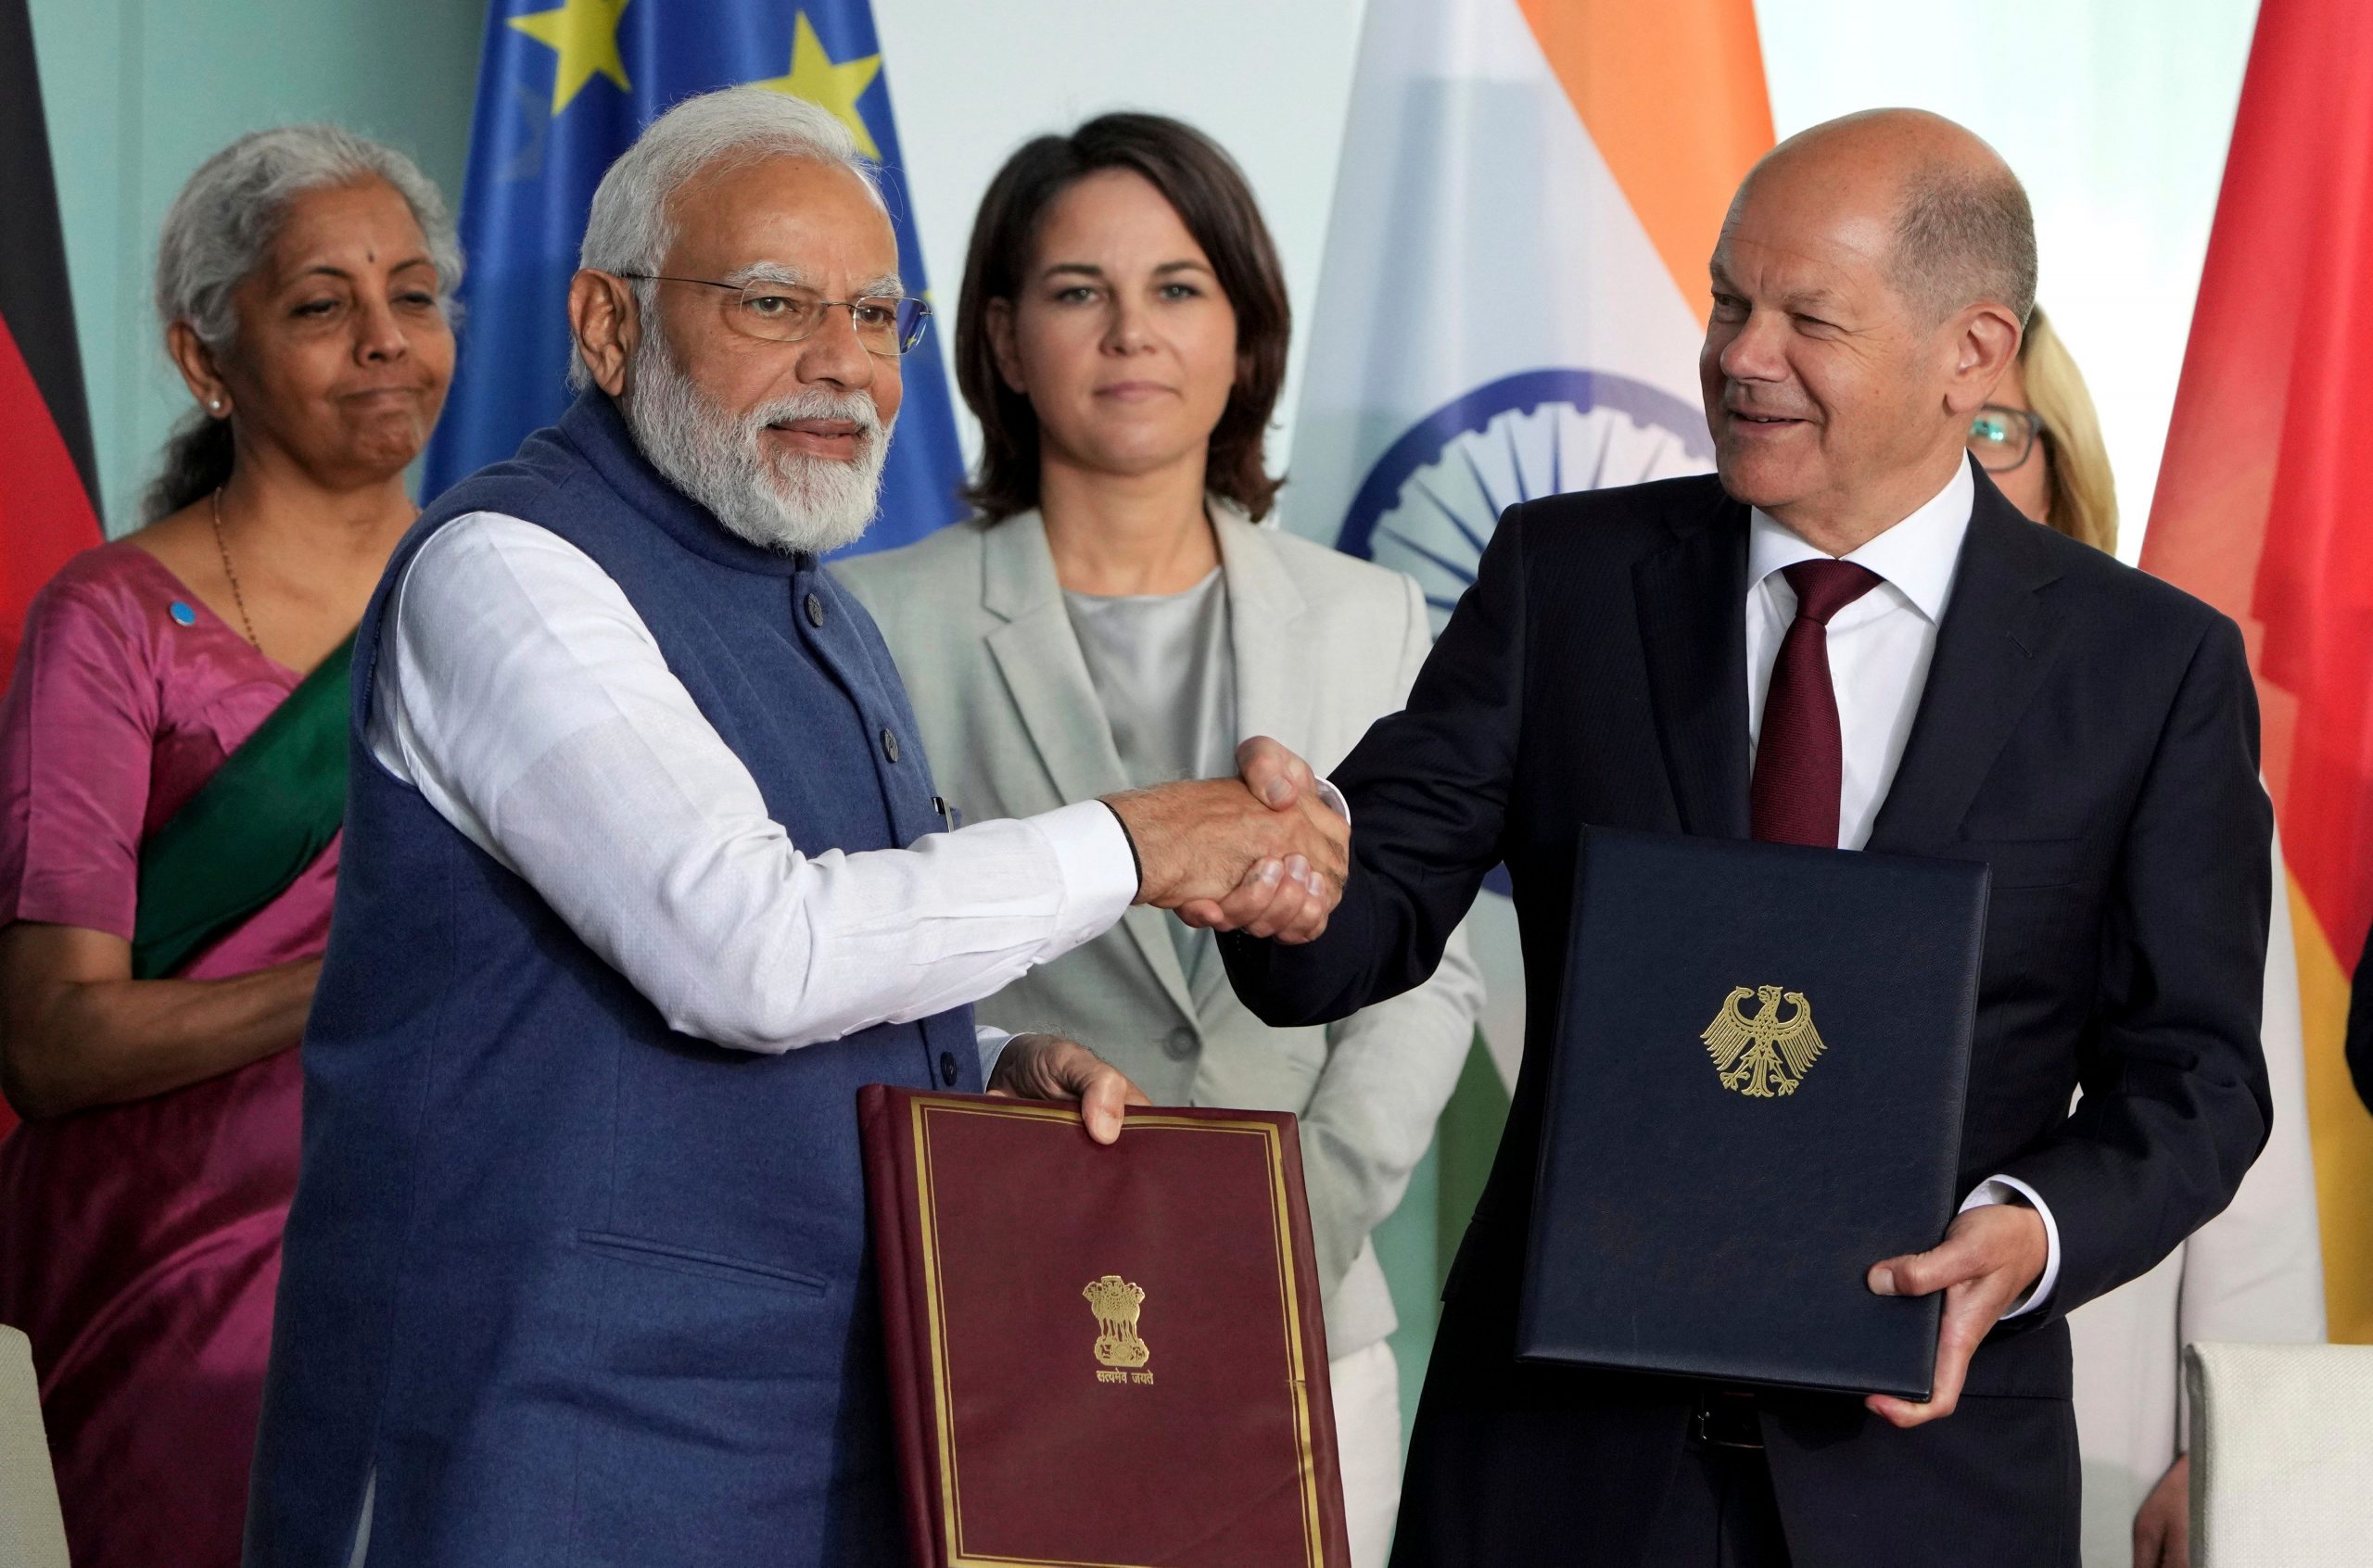 France, India call for an end to ‘suffering of people’ in Ukraine